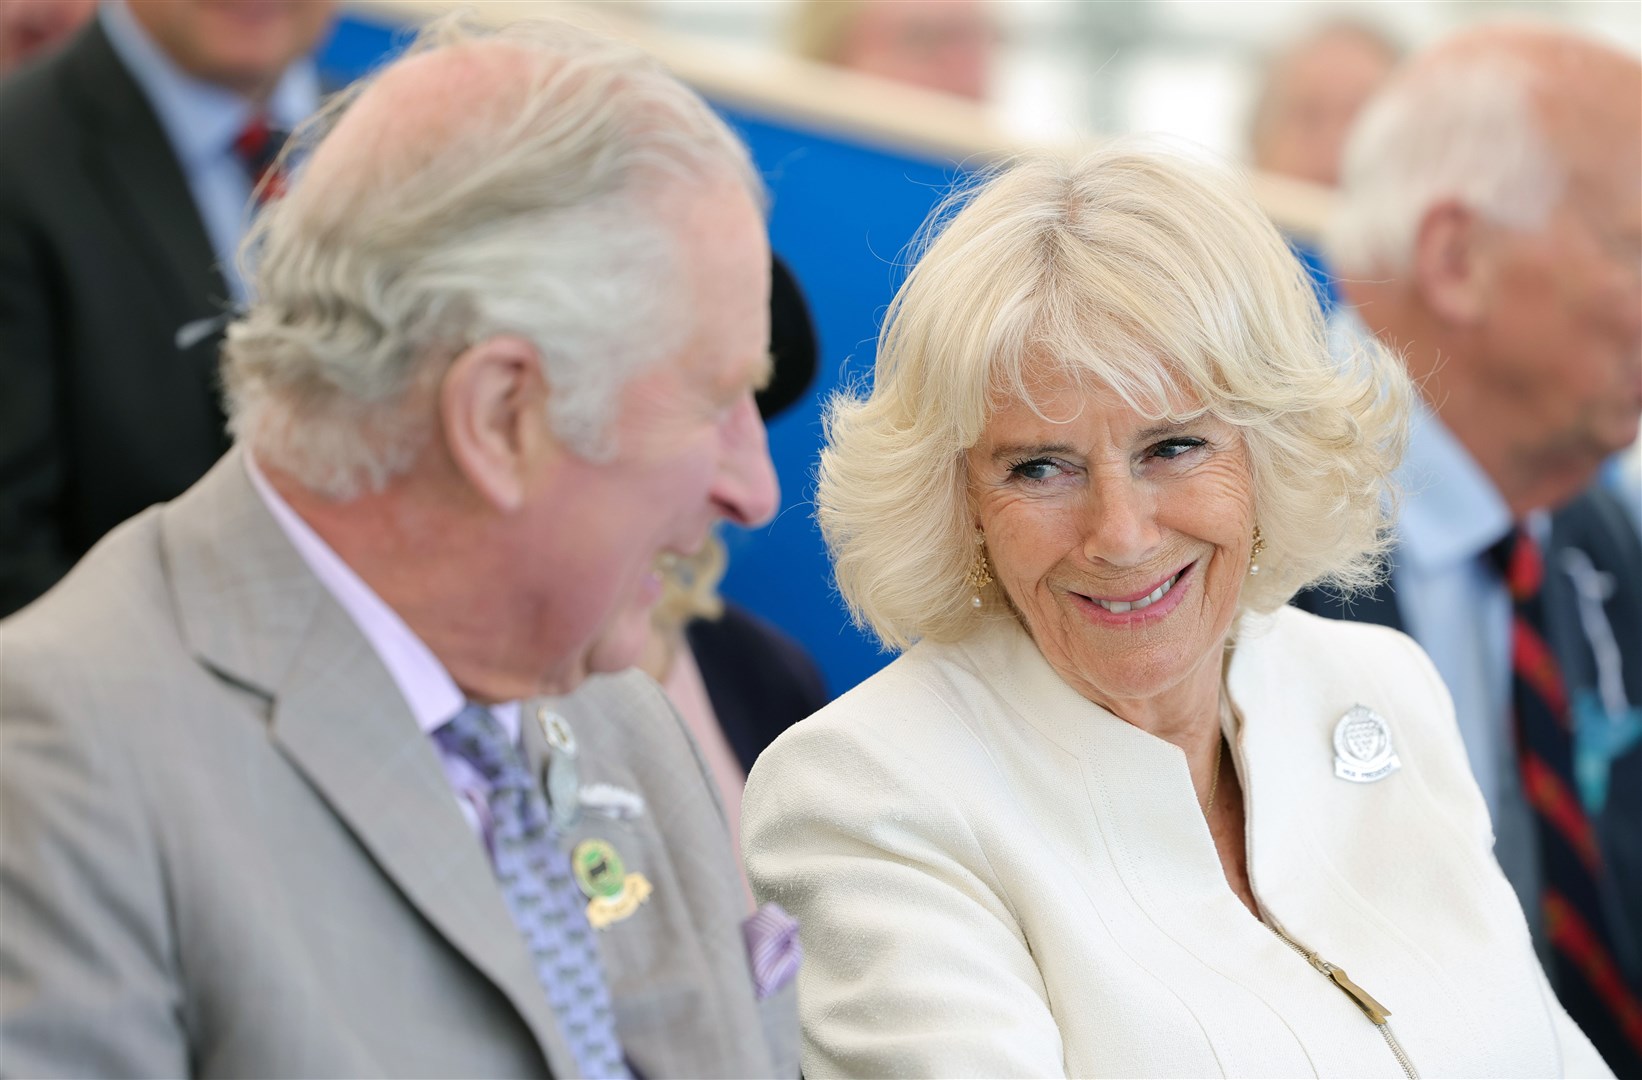 The Prince of Wales and the Duchess of Cornwall in the royal box during a show of British livestock (PA)